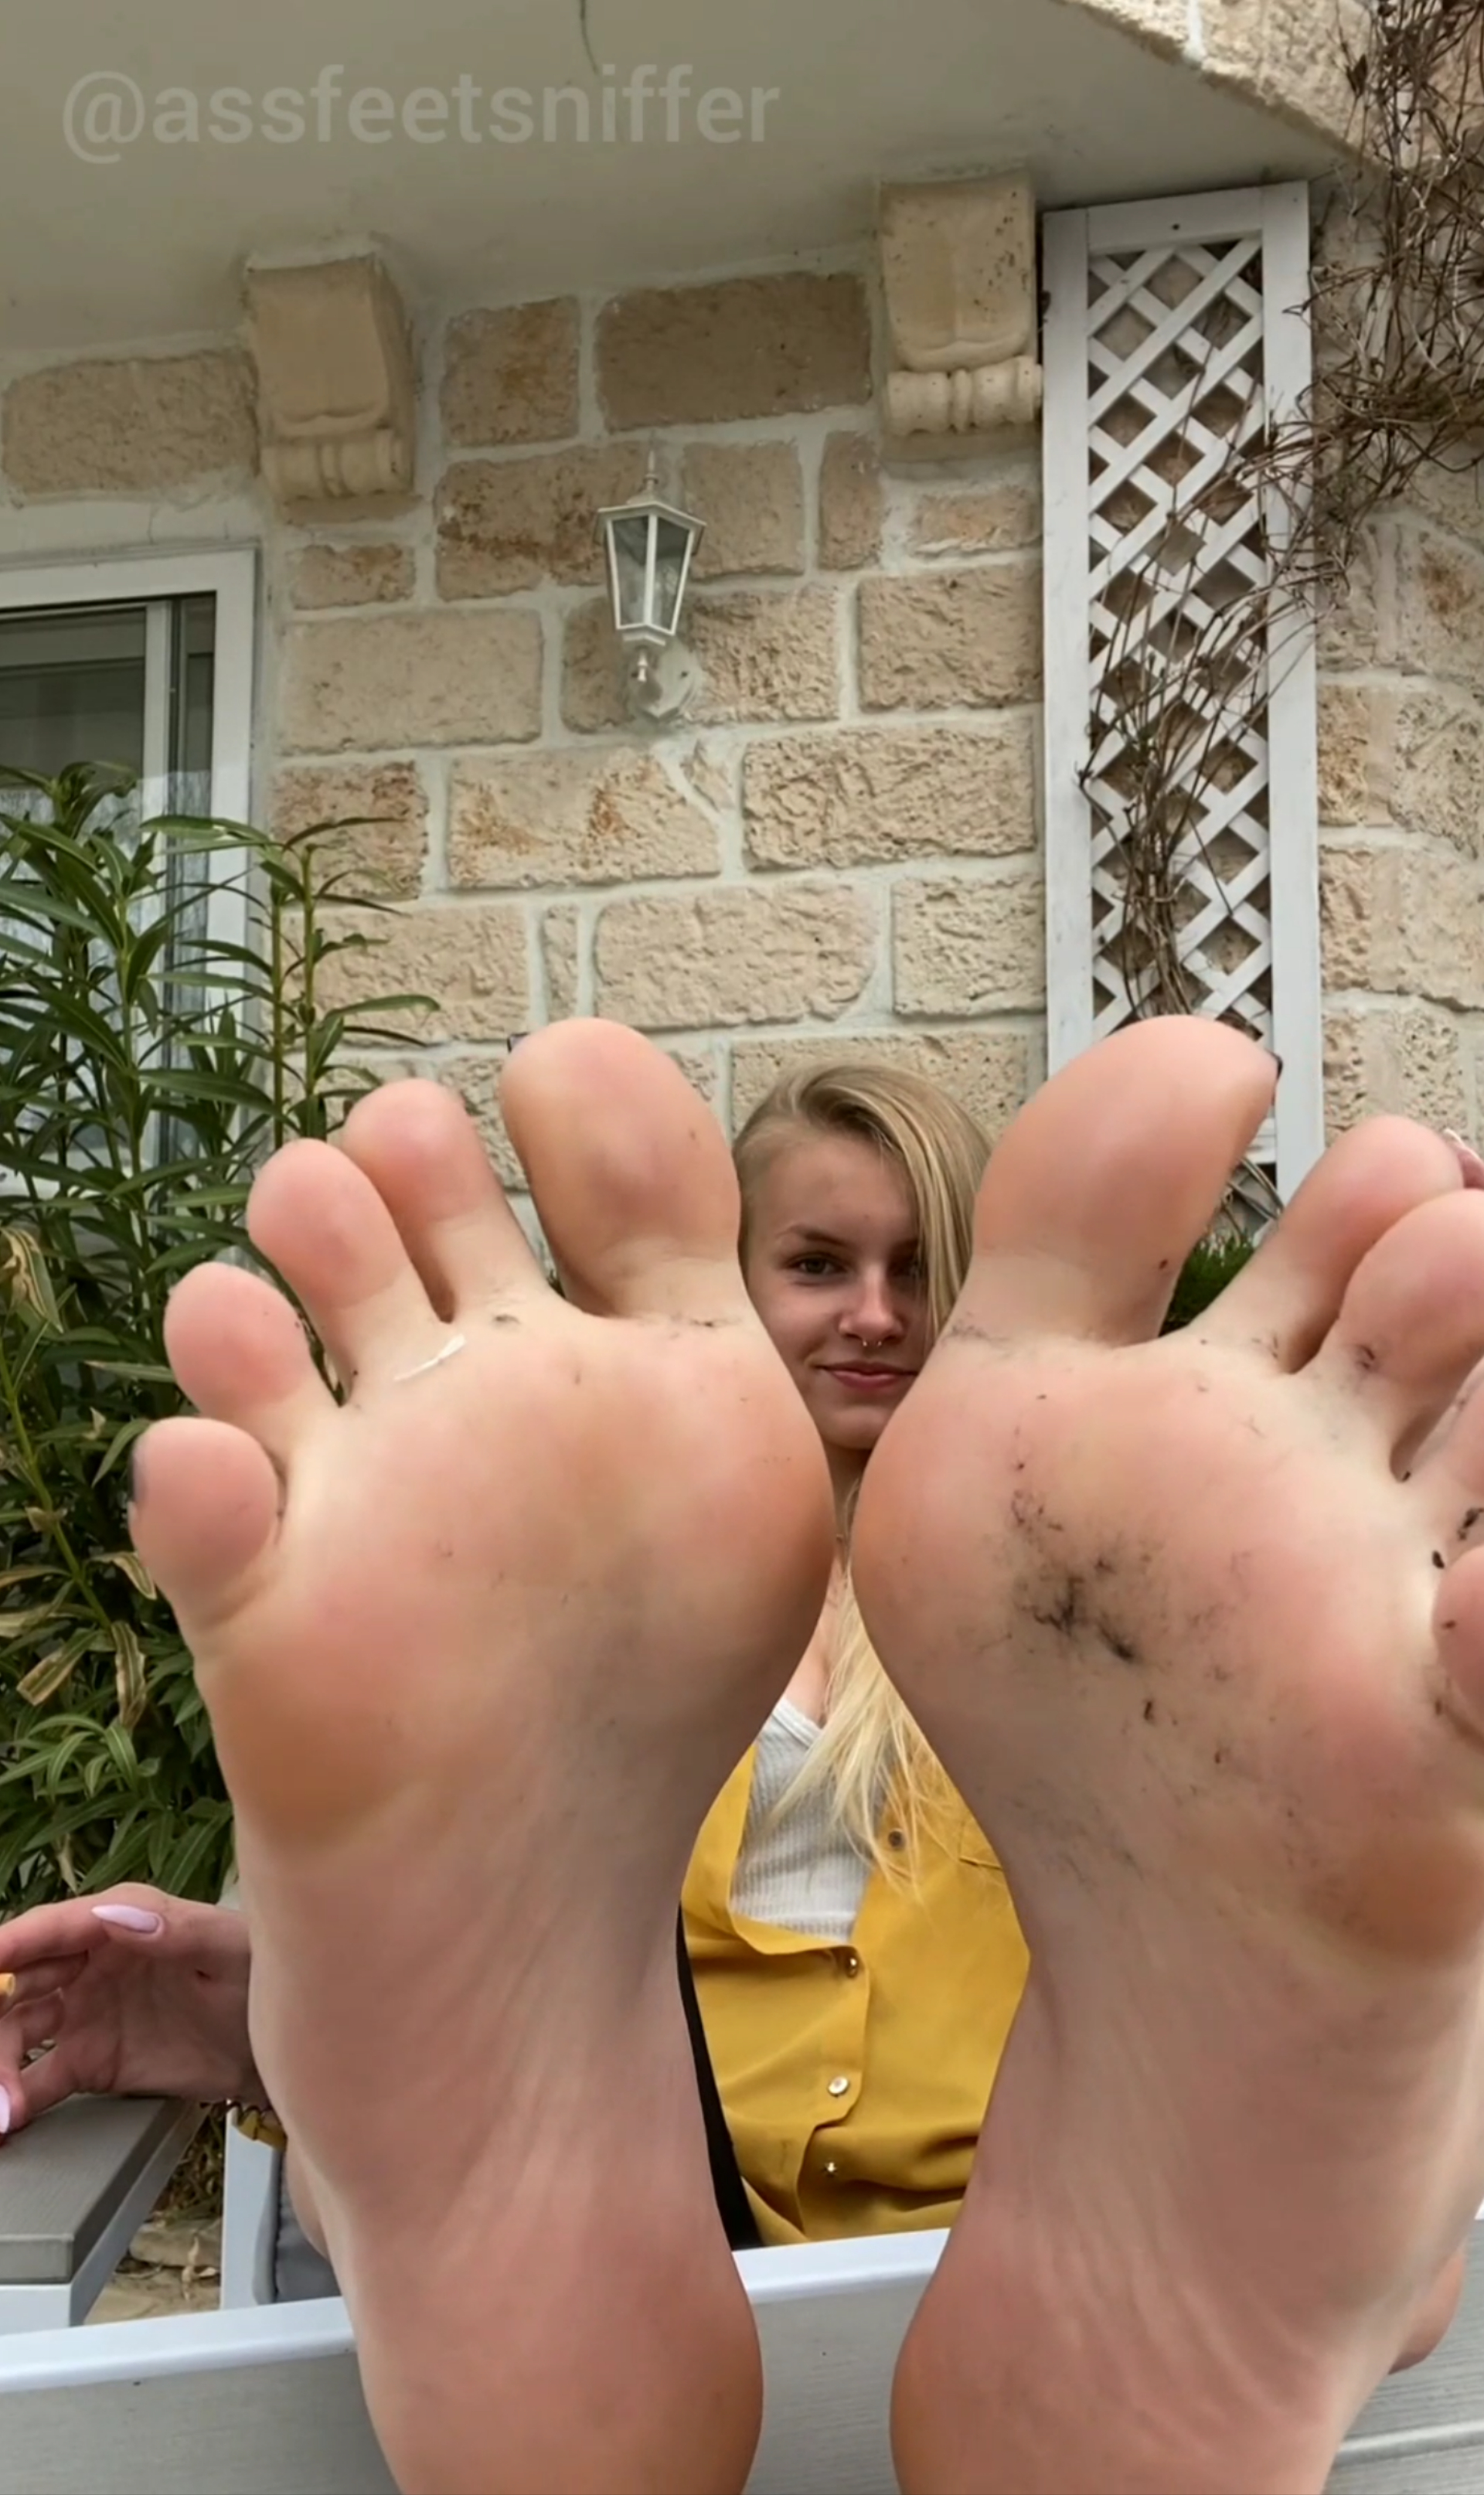 Dirty Foot - Blonde Girl Stinky Feet And Dirty Socks - ThisVid.com